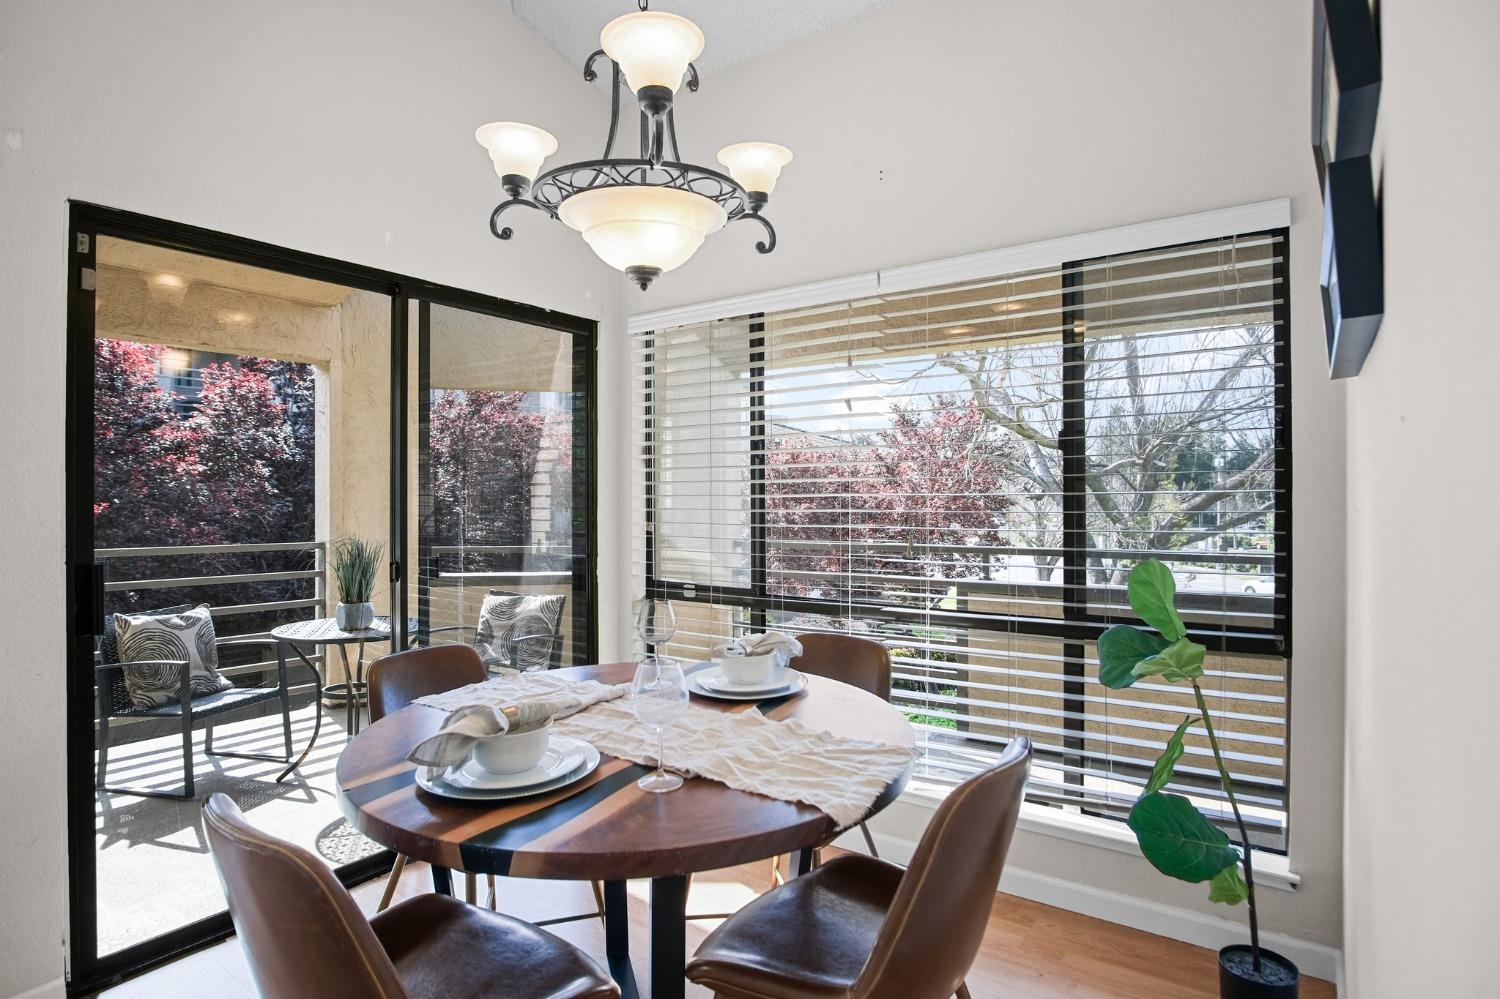 a view of a dining room with furniture window and outside view